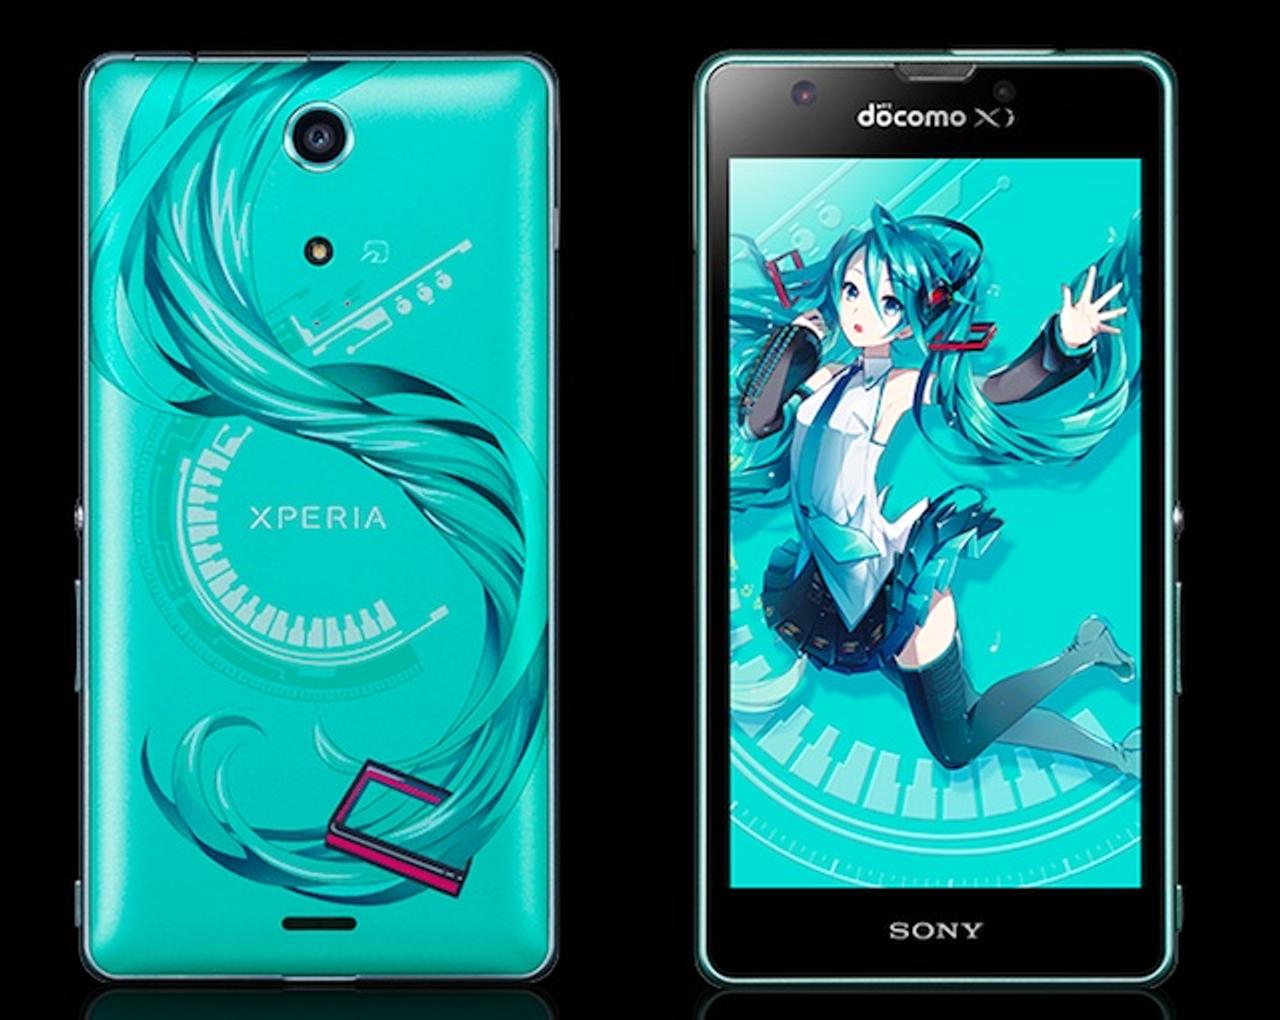 Xperia 初音ミクバージョンの発売日は9月18日に決定